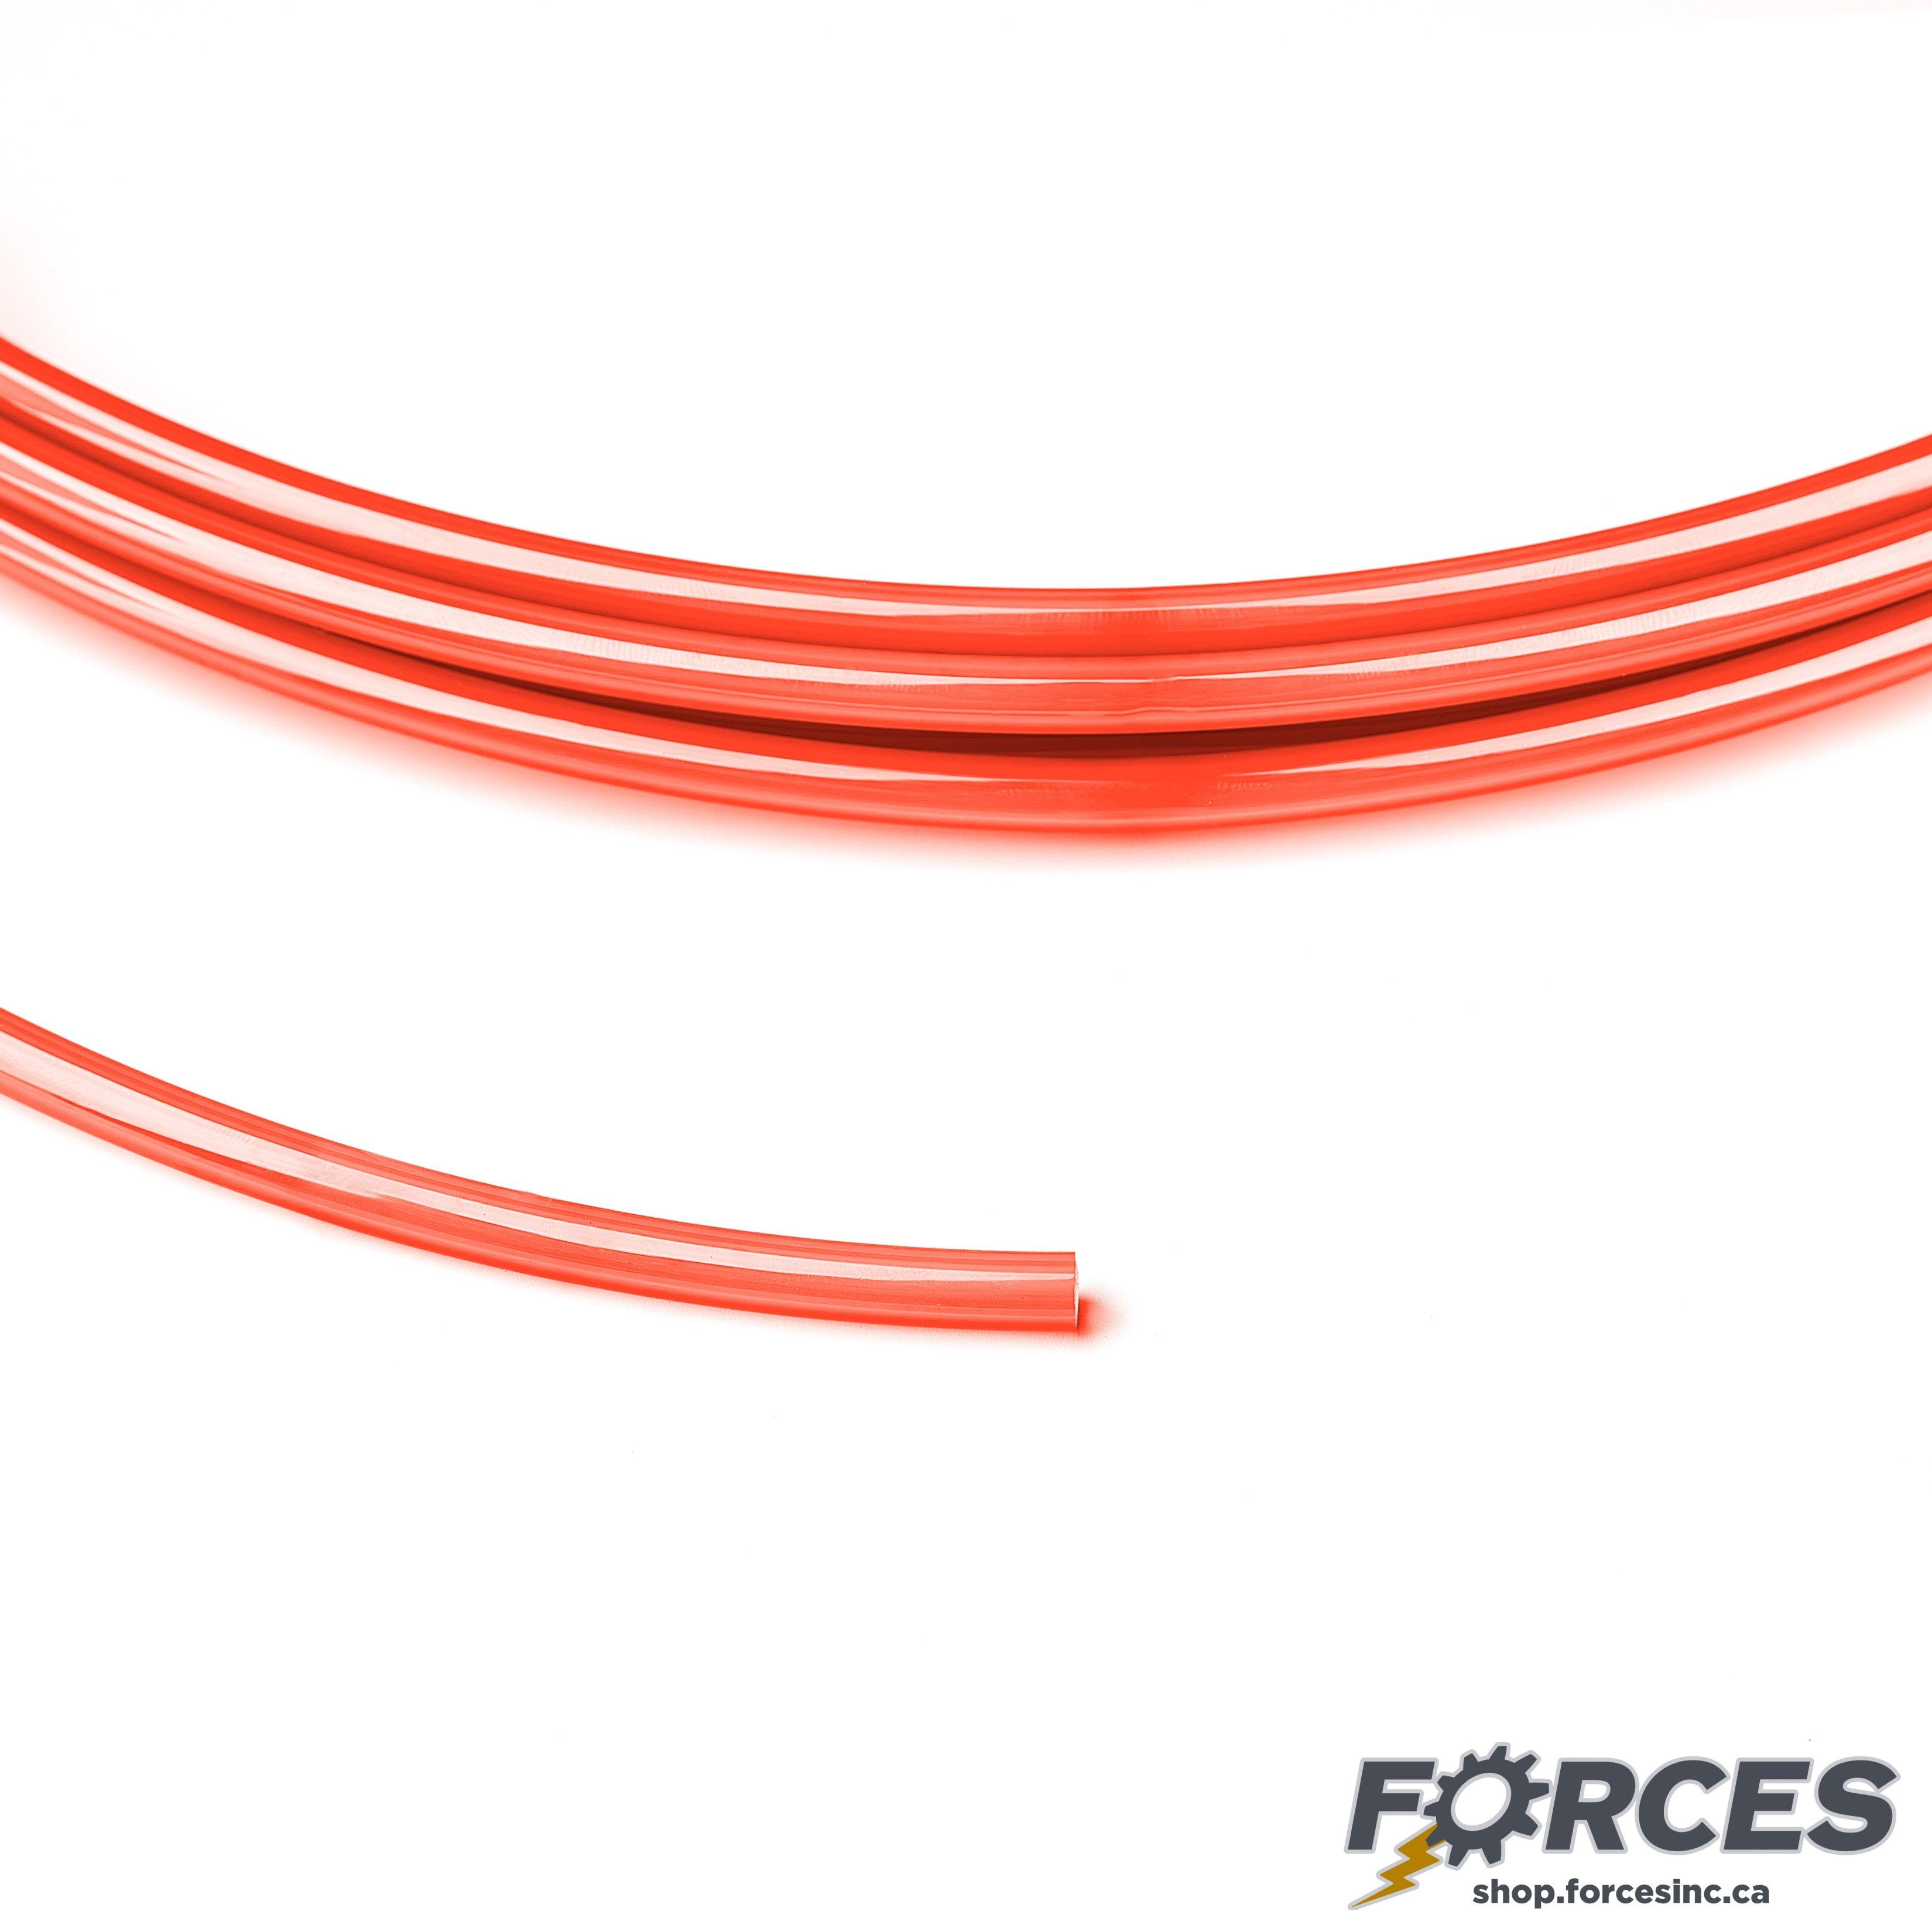 Pneumatic Air Tubing 12mm x 9mm Red Polyurethane - 330ft - Forces Inc